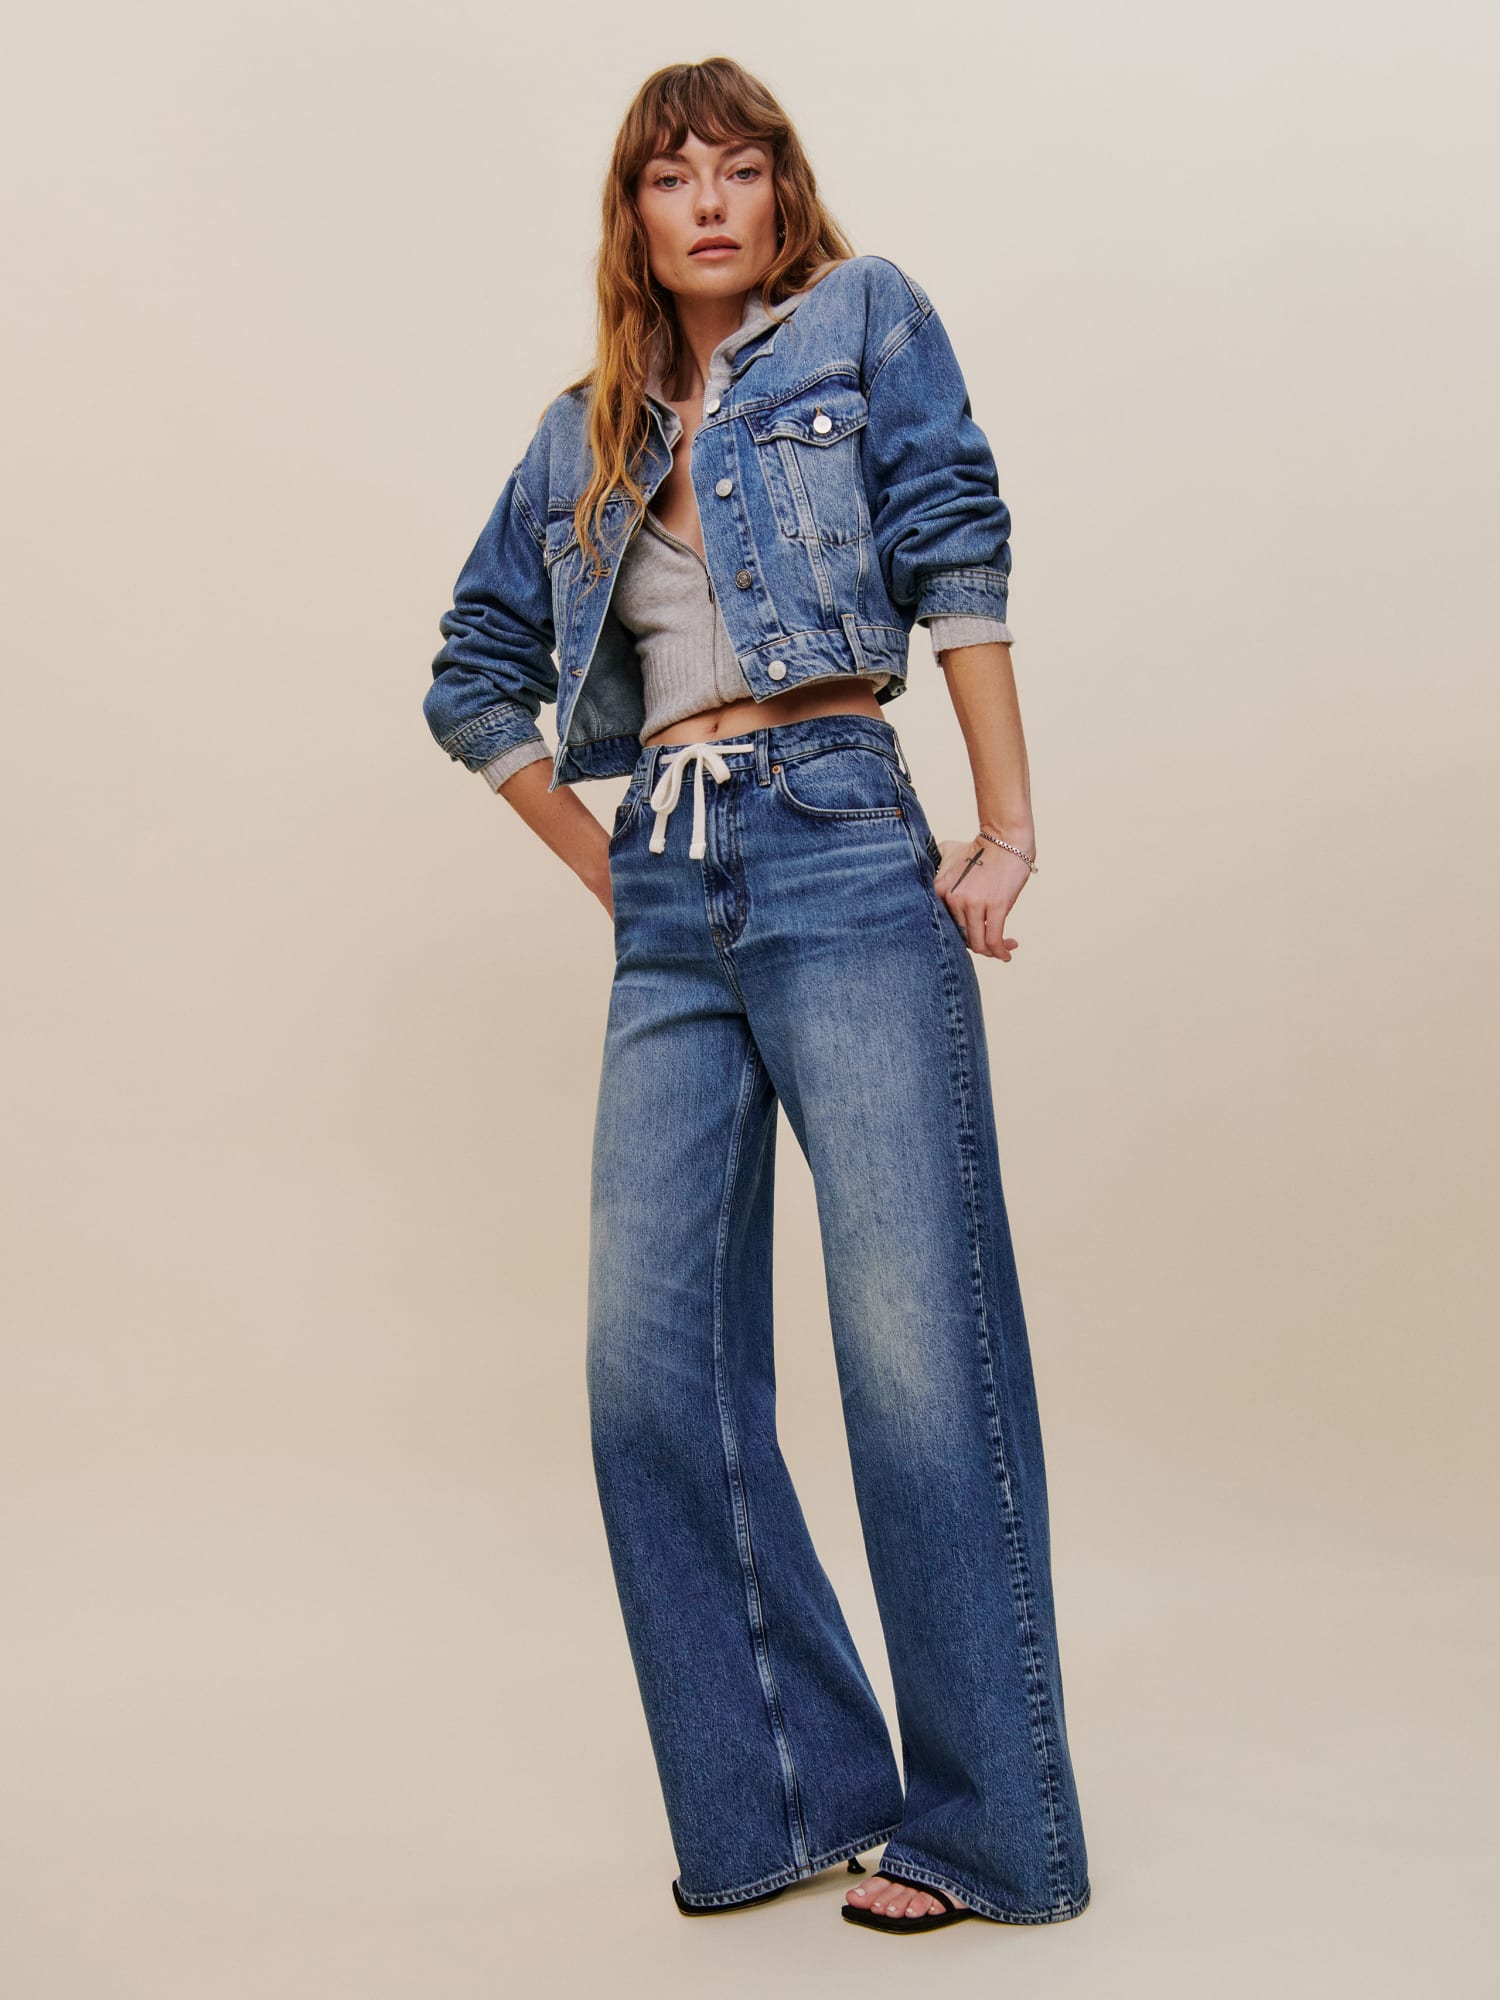 Cary Drawstring Waist Slouchy Wide Leg Jeans